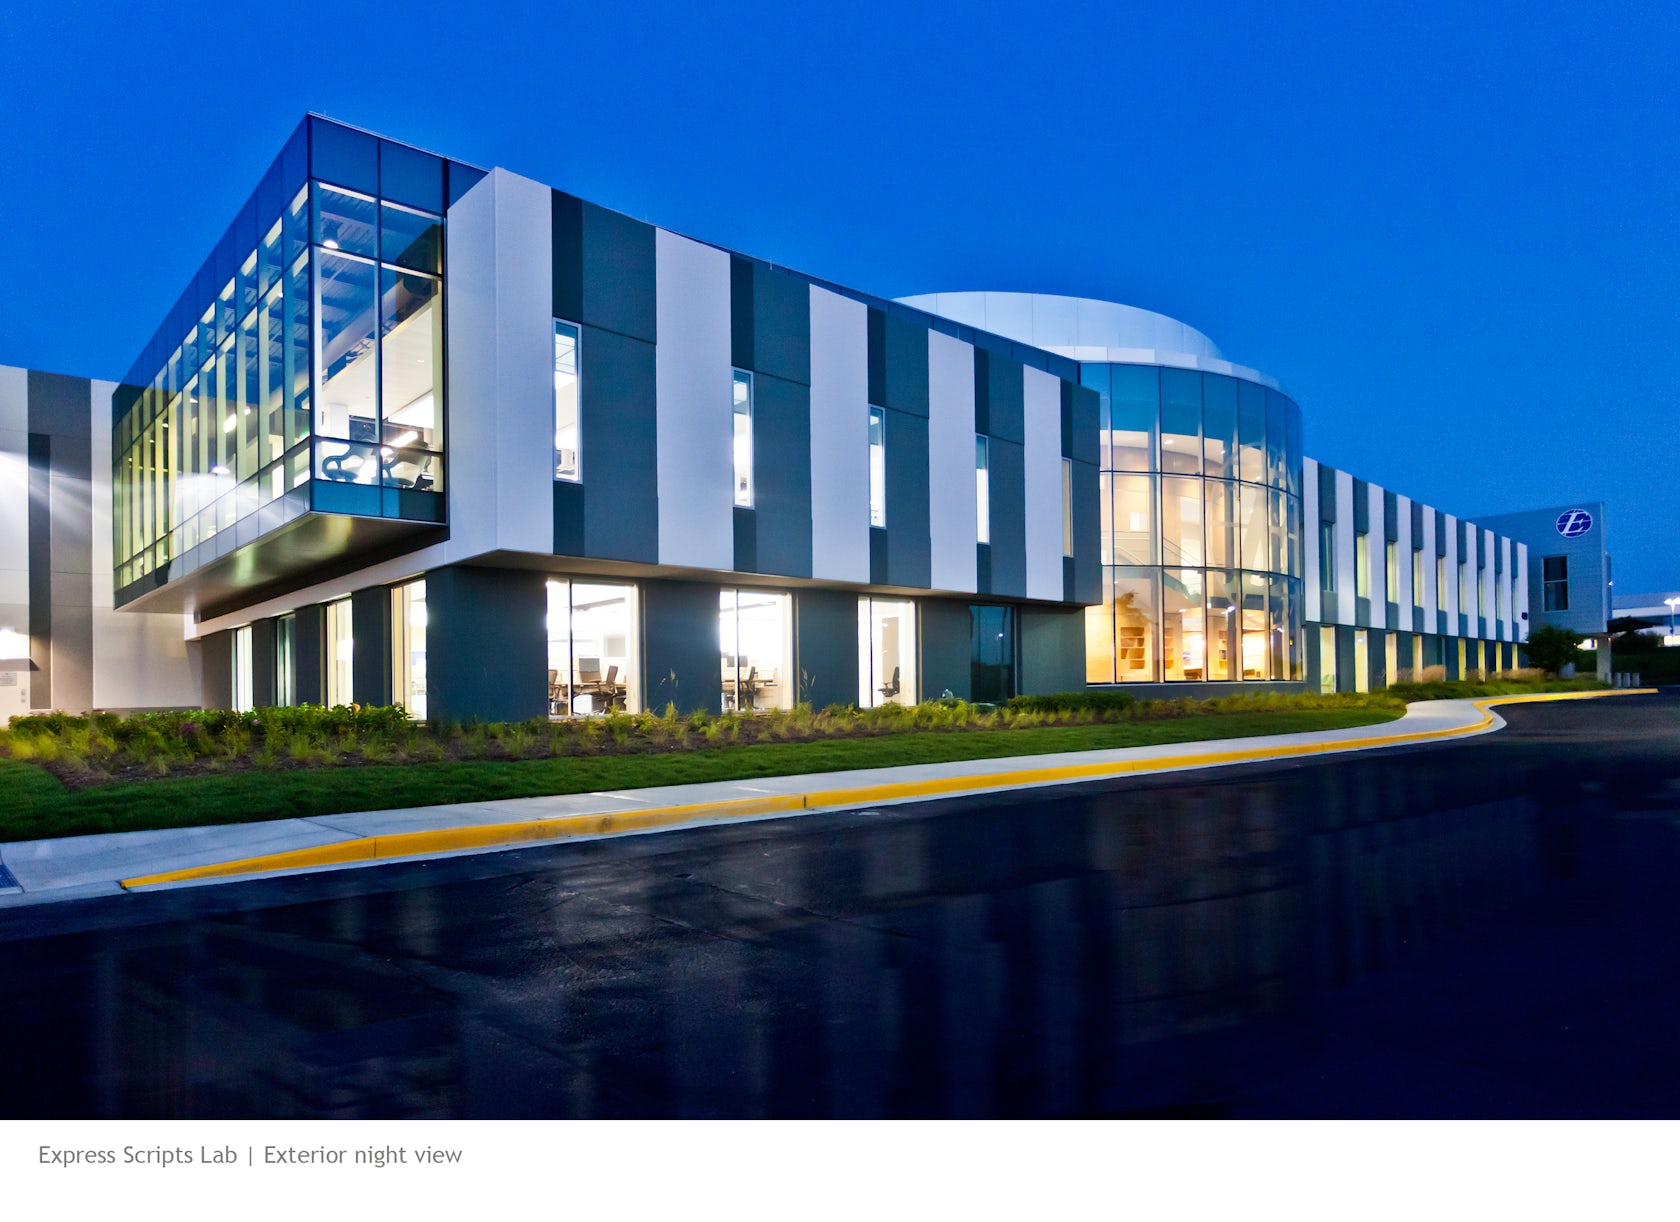 The Express Scripts Lab - Architizer
